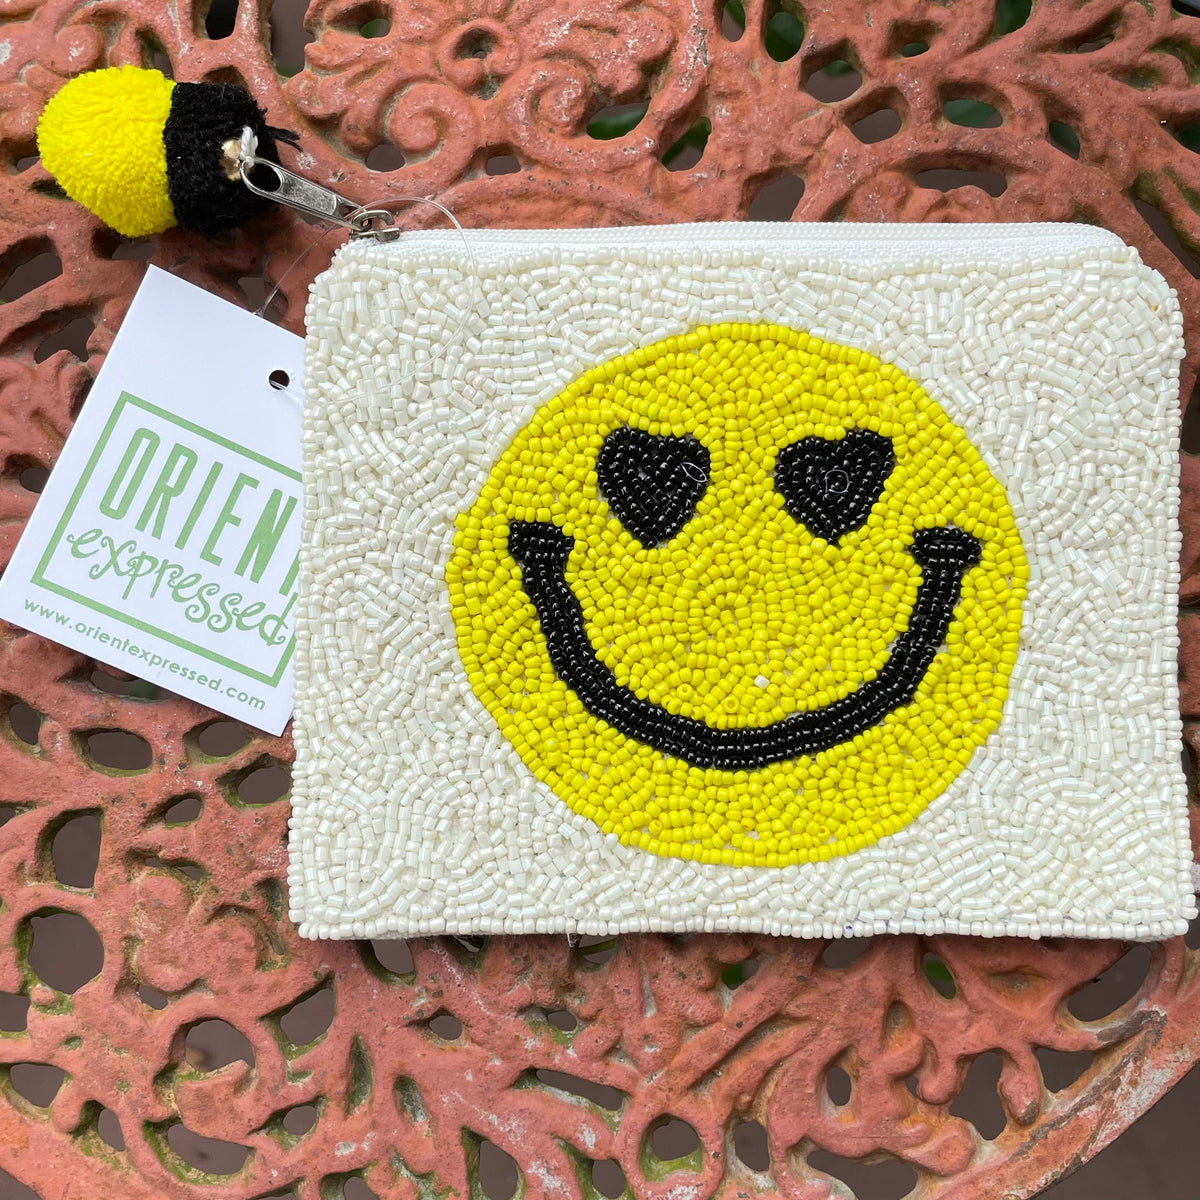 SMILEY FACE BEADED BAG – Orient Expressed